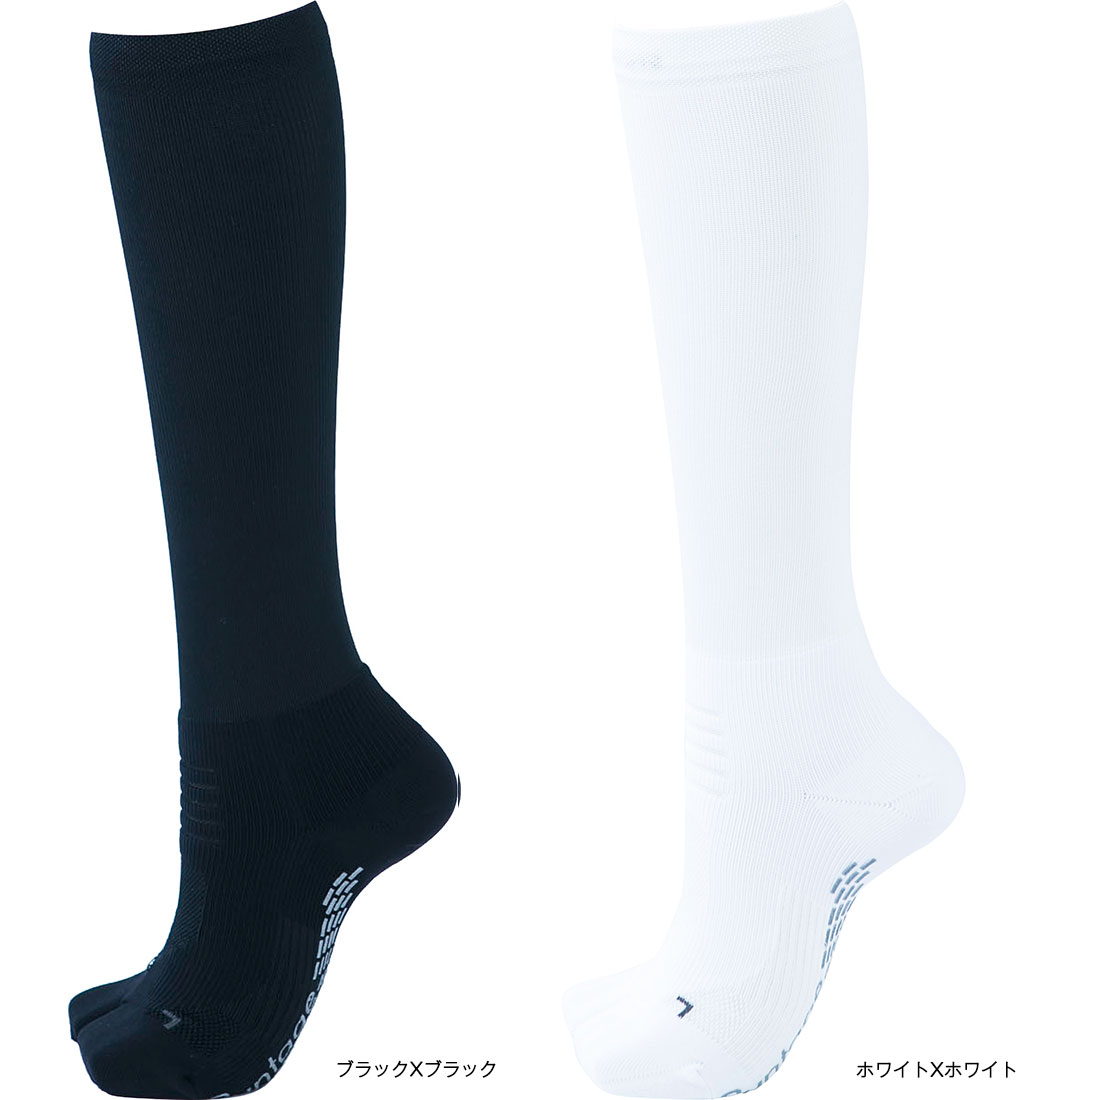 Runtage Athlete round Pro V2 Golf for socks all 3 size made in Japan left right independent design men's lady's i Ida socks mail service free shipping 